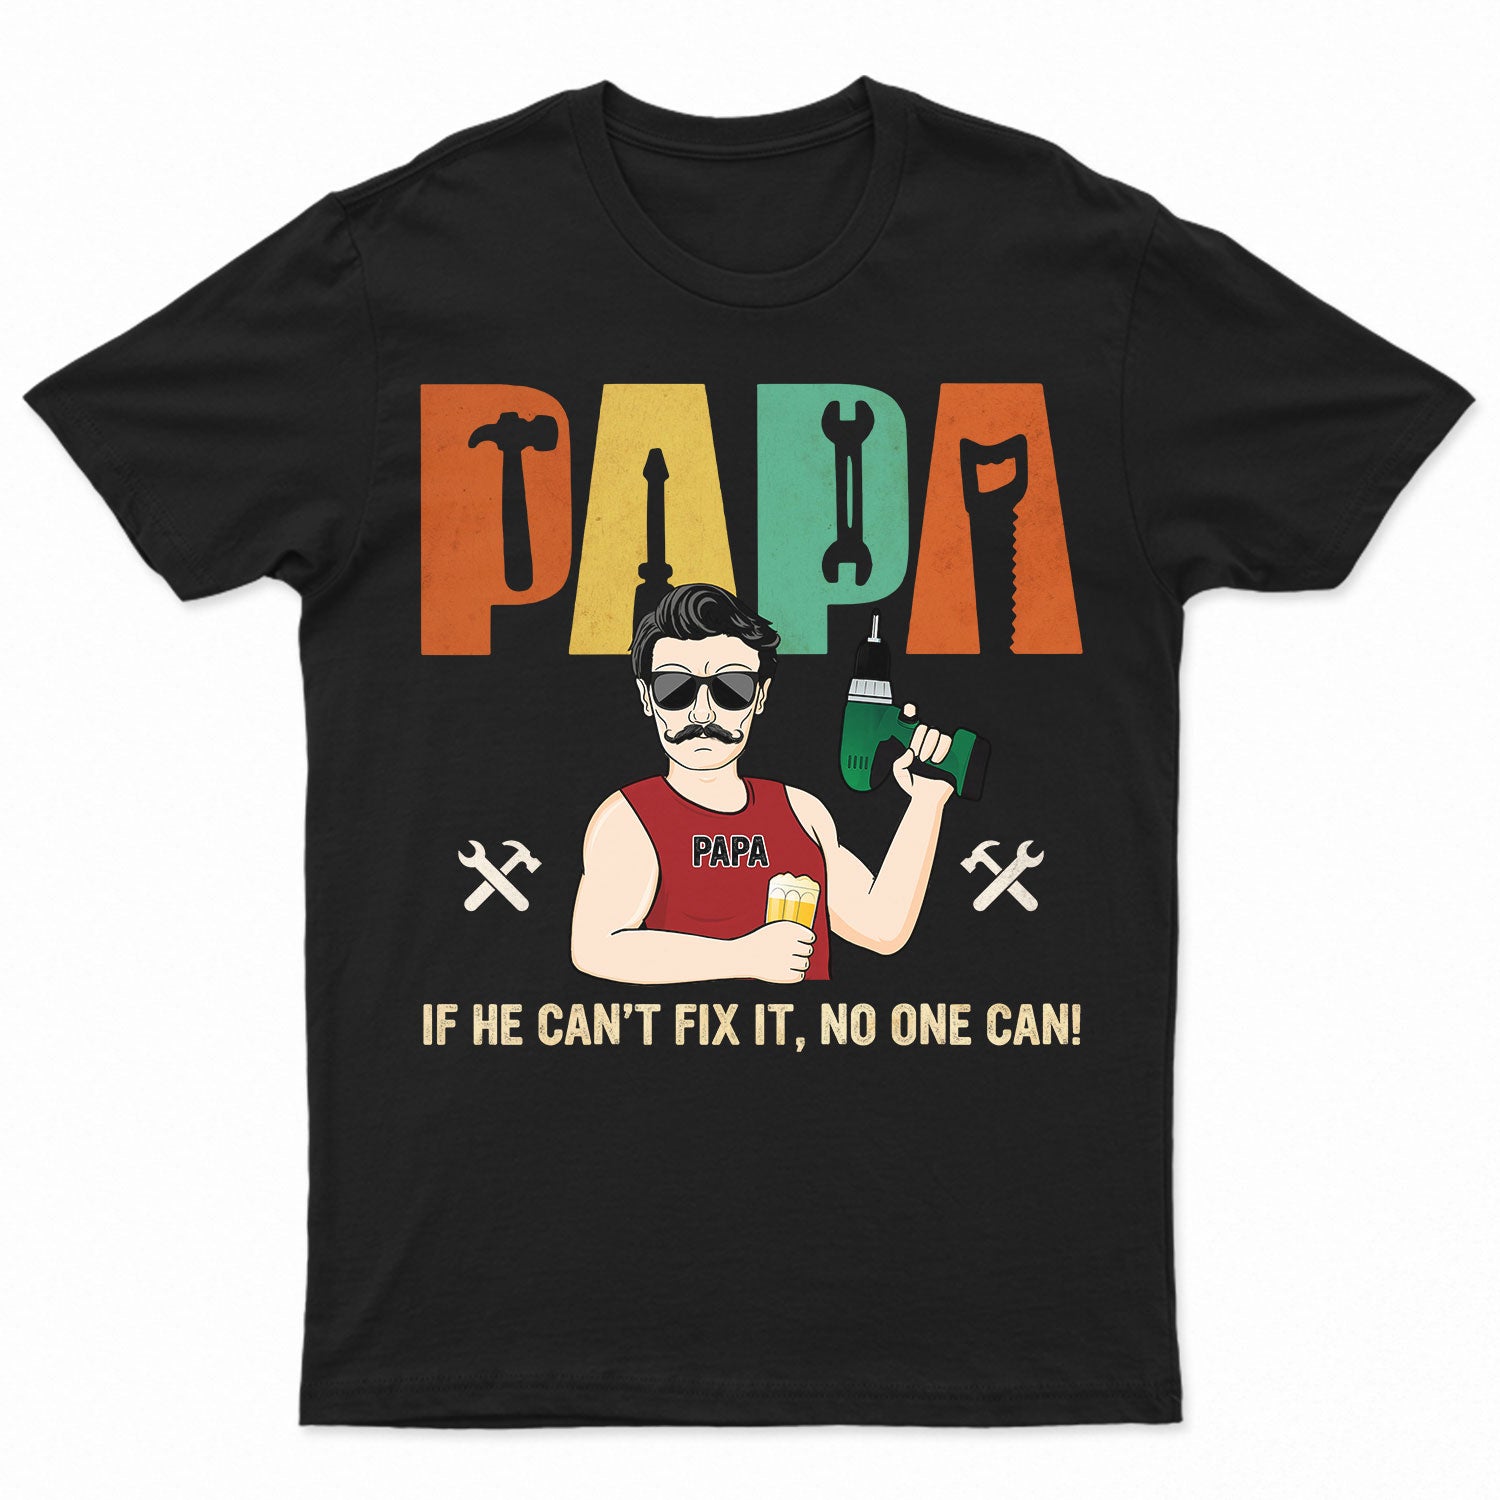 Papa If Dad Can't Fix It No One Can - Birthday, Family Gift For Dad, Father, Grandpa, Husband, Mechanics, Men - Personalized Custom T Shirt